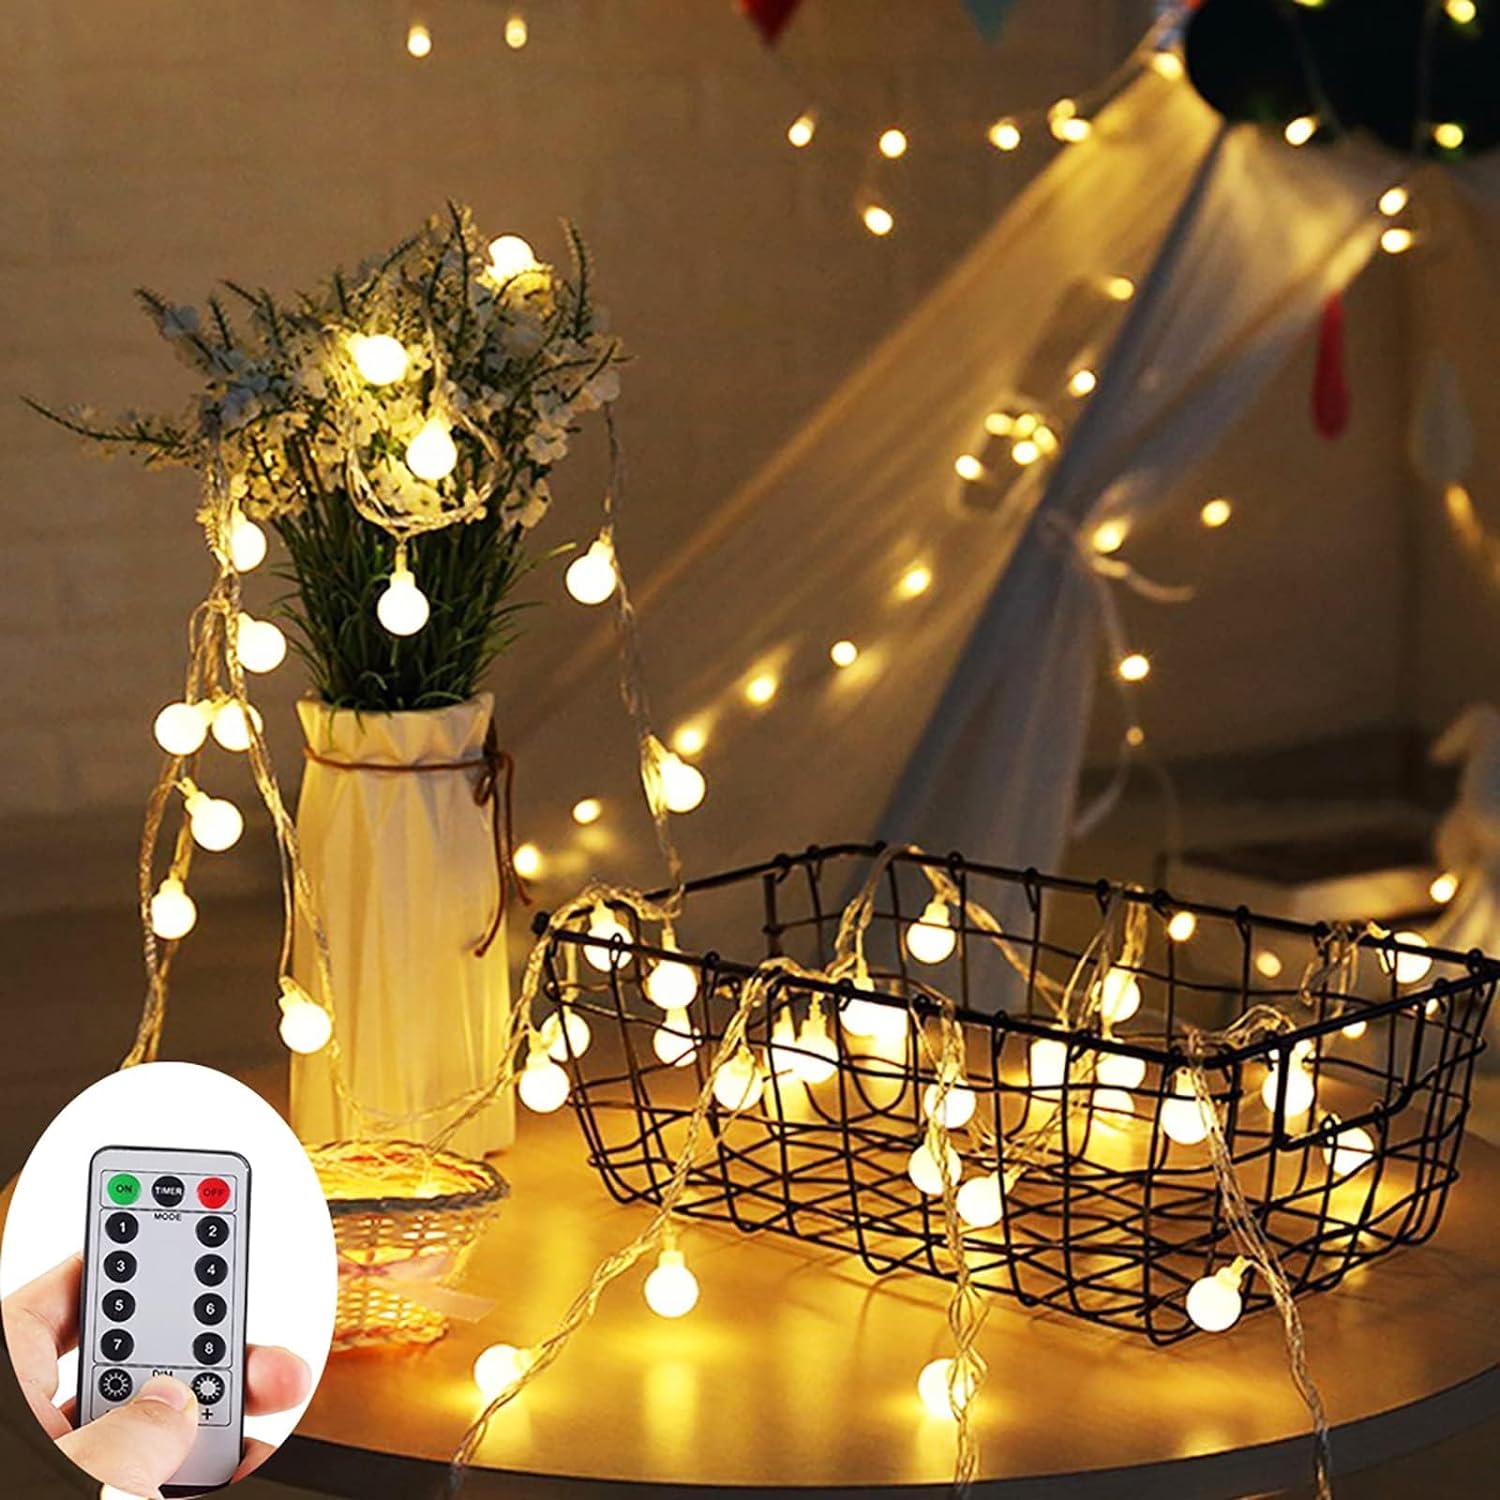 ZOUTOG Battery Operated String Lights, 33ft 100 LED Bulb Warm White Battery Operated Camping Lights with Remote Controller, Timer Fairy Light for Christmas/Wedding/Camping Indoor and Outdoor